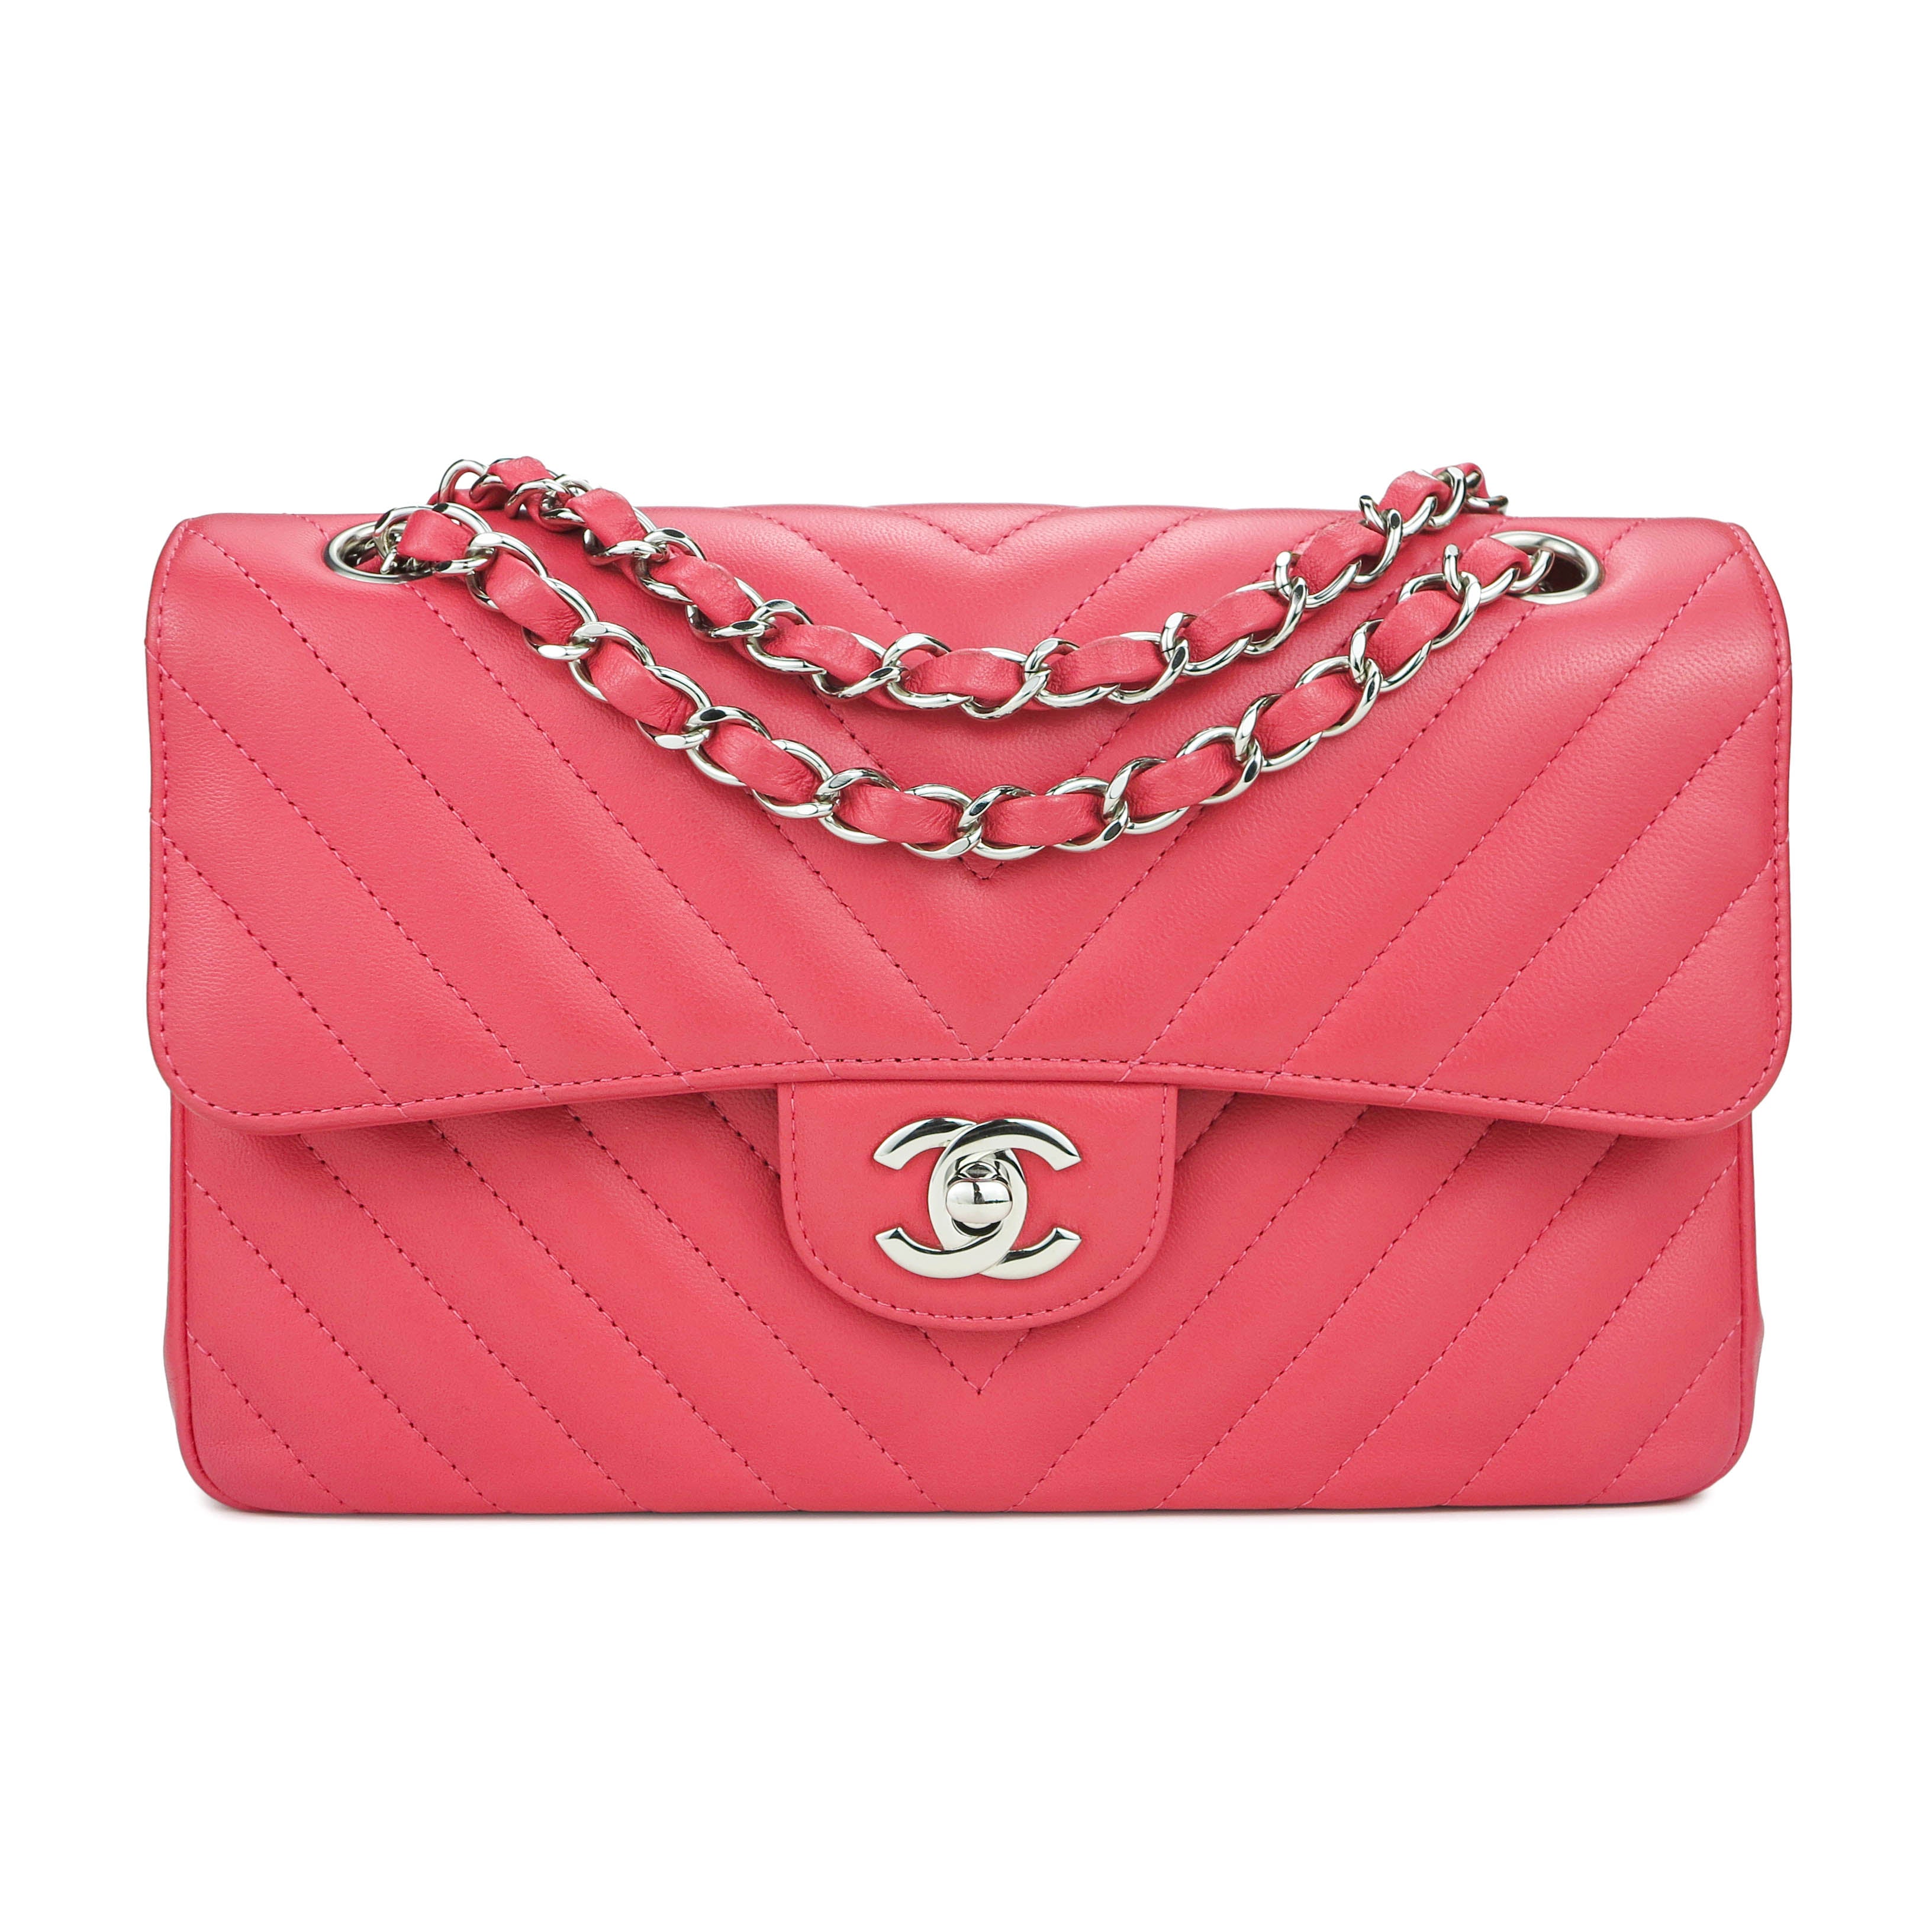 Small Chevron Classic Double Flap Bag in Coral Pink Lambskin